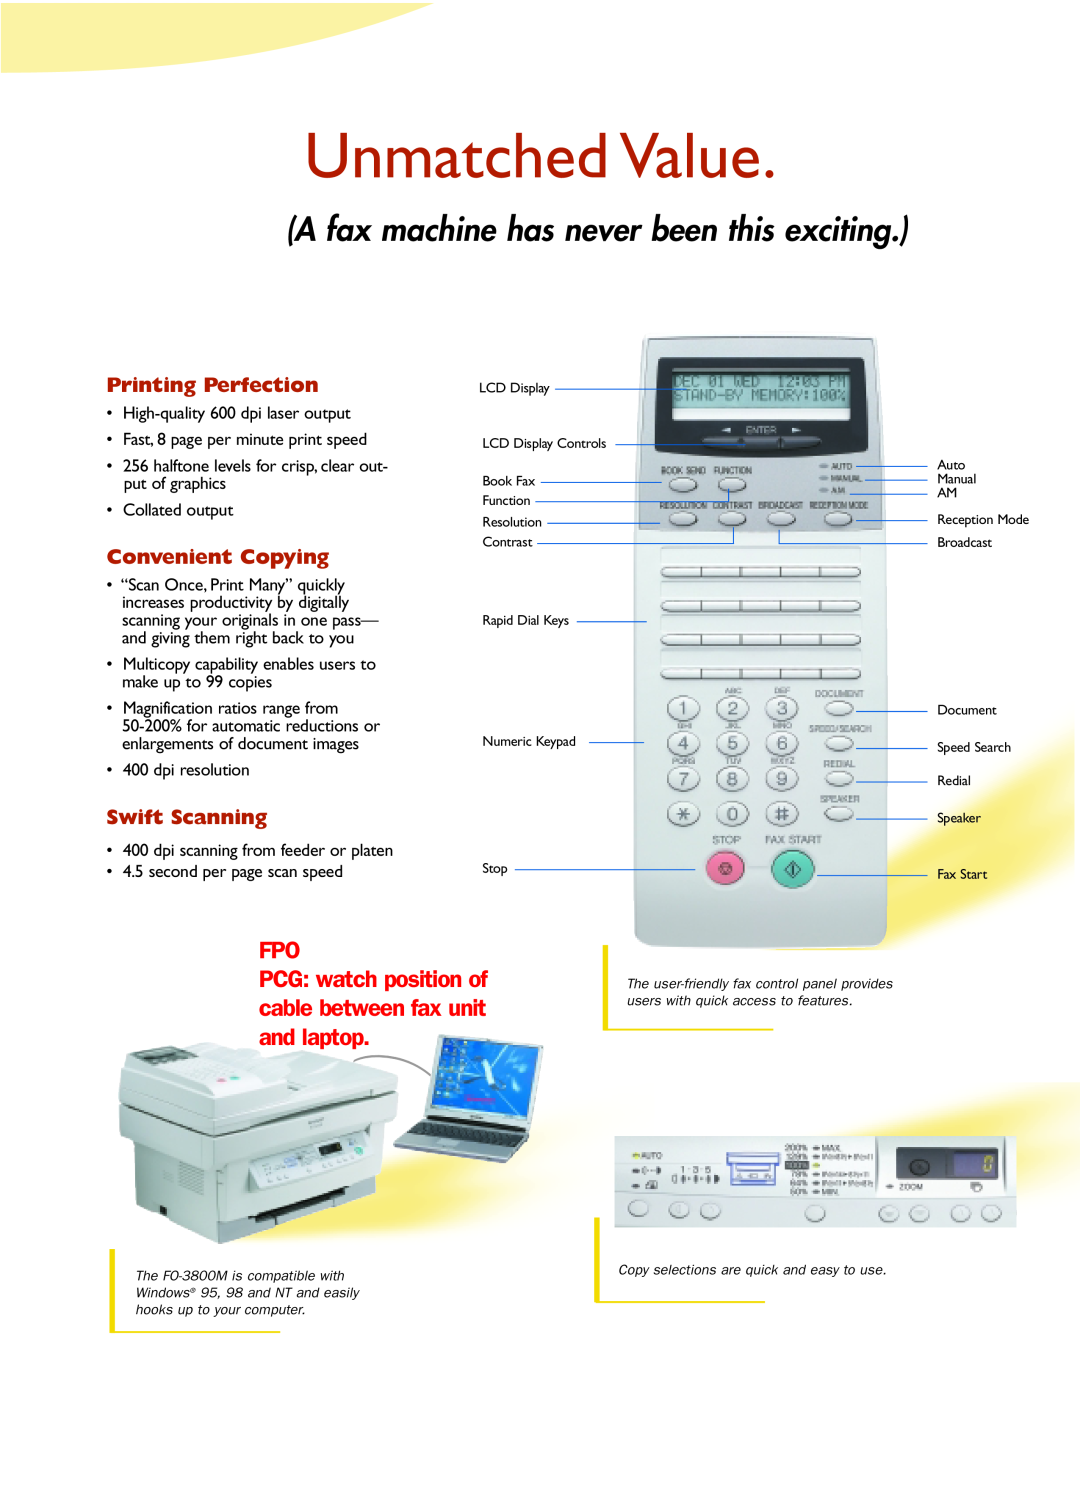 Sharp manual Unmatched Value, Printing Perfection, Convenient Copying, Swift Scanning, The FO-3800M is compatible with 